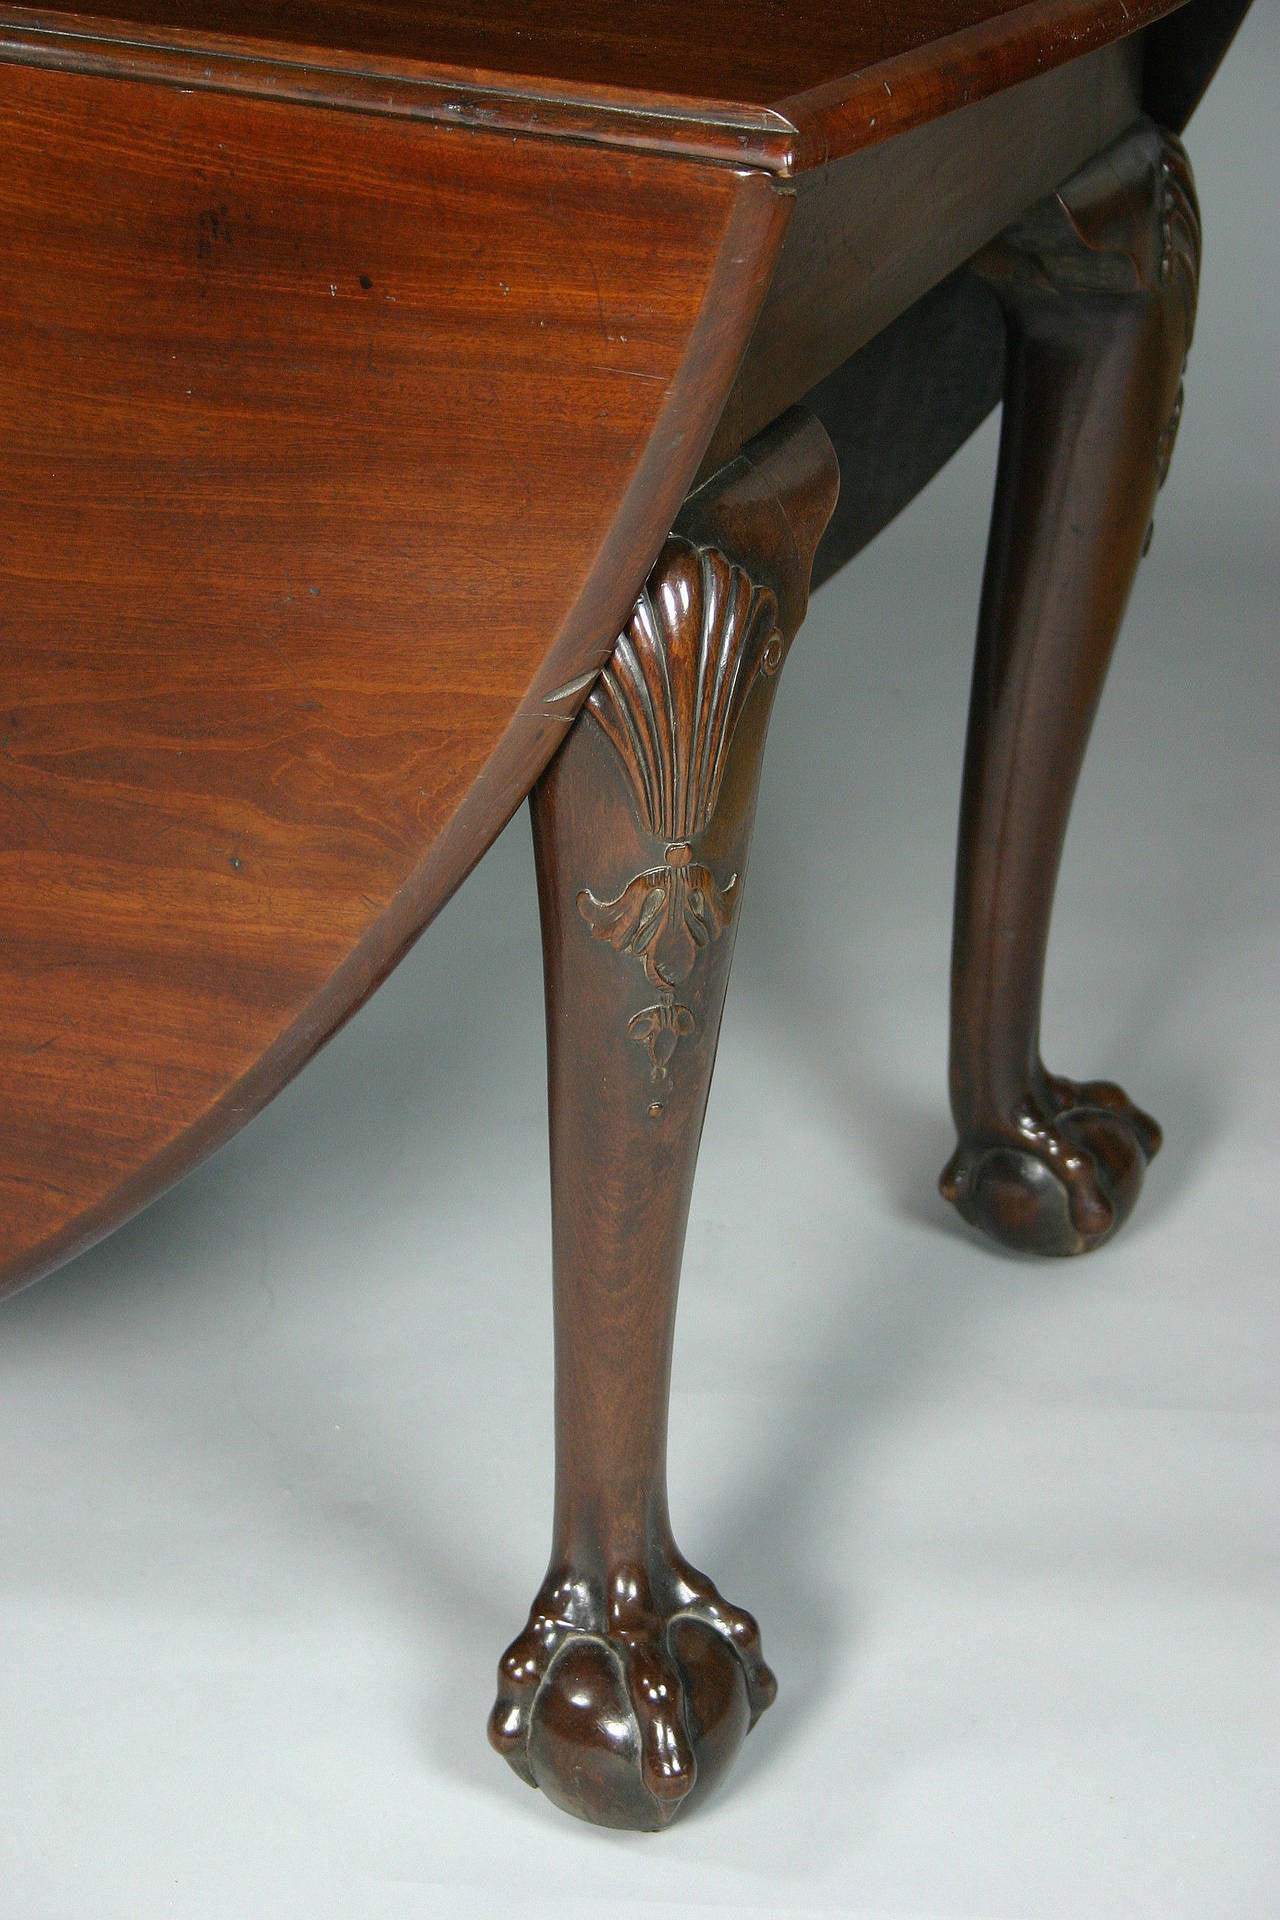 Fine George II mahogany oval drop leaf table on cabriole legs, carved at the knees with shells and bellflowers and ending in ball and claw feet. English, Circa 1750. 
Height 29 ins / 74 cms, Width 75 ins / 191 cms, Length 67 ins / 170 cms